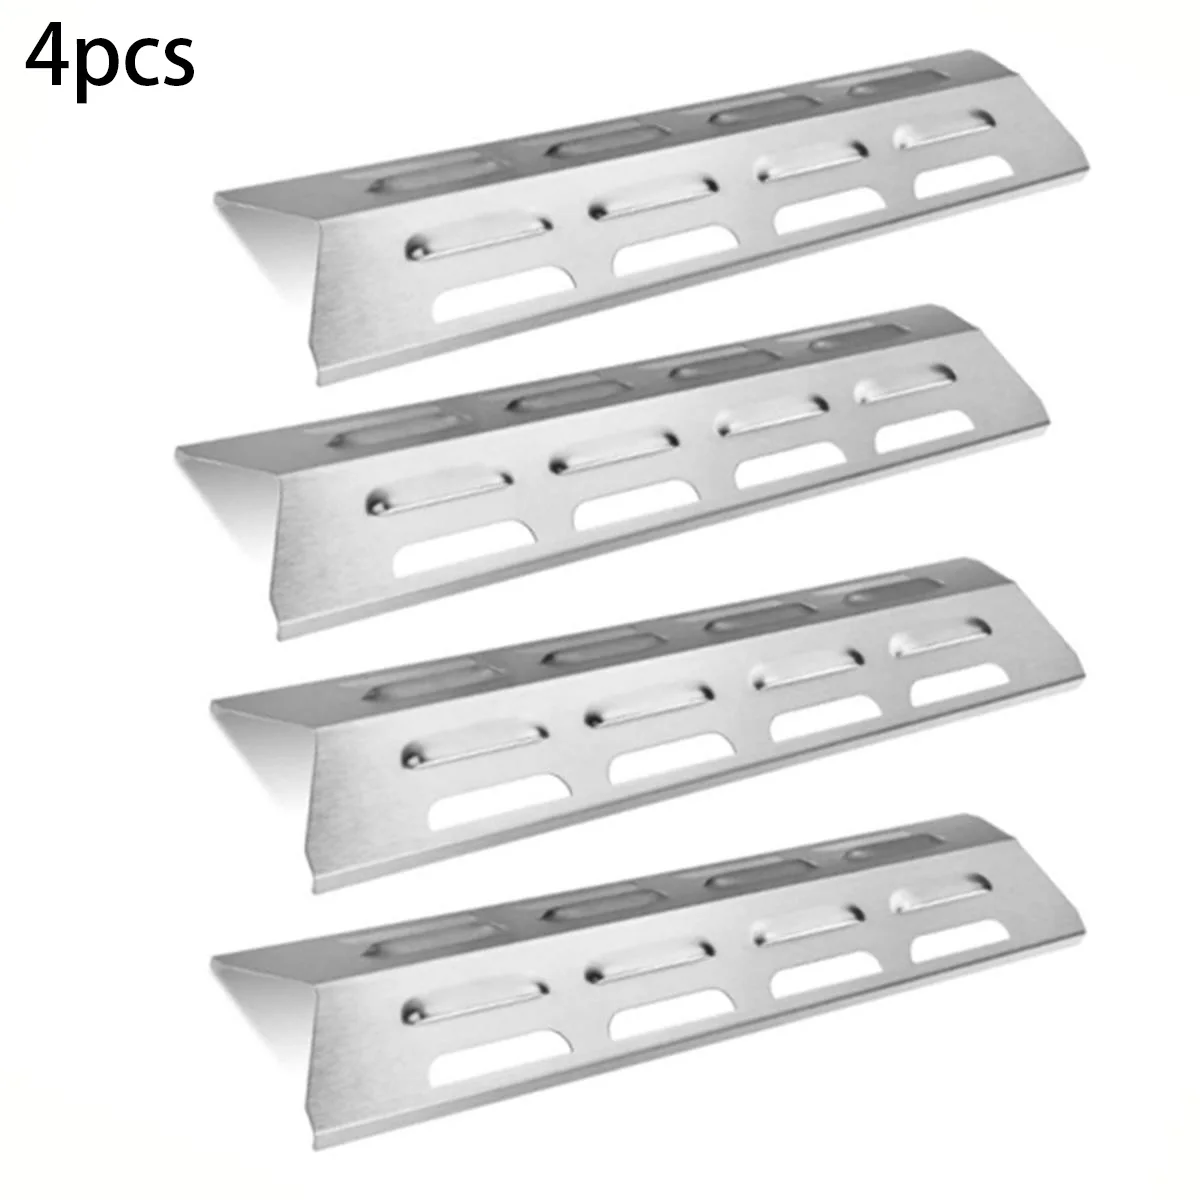 

4Pcs Stainless Steel Barbecue Gas Grill Oven Heat Plate Heat Tents Deflector Burners Cover Accessory Camping Tool